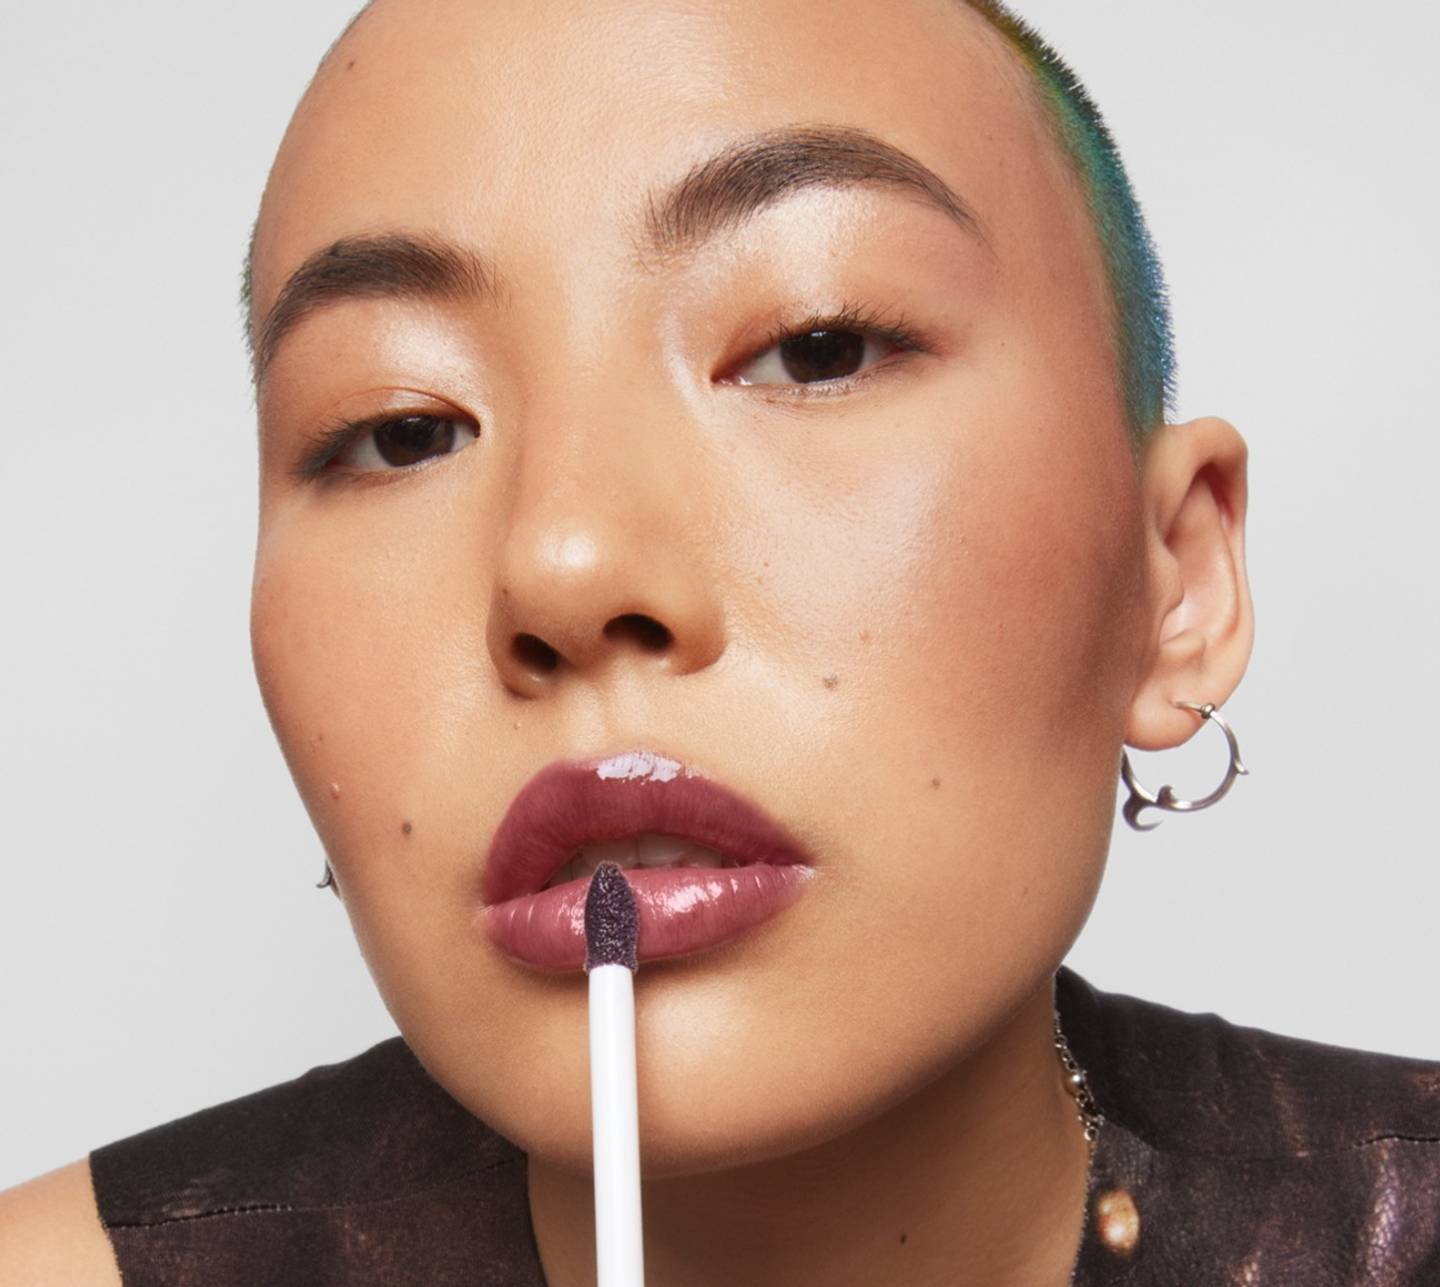 Model applies Milk Makeup Odyssey Lip Oil Gloss in Voyage to lips on a white background.